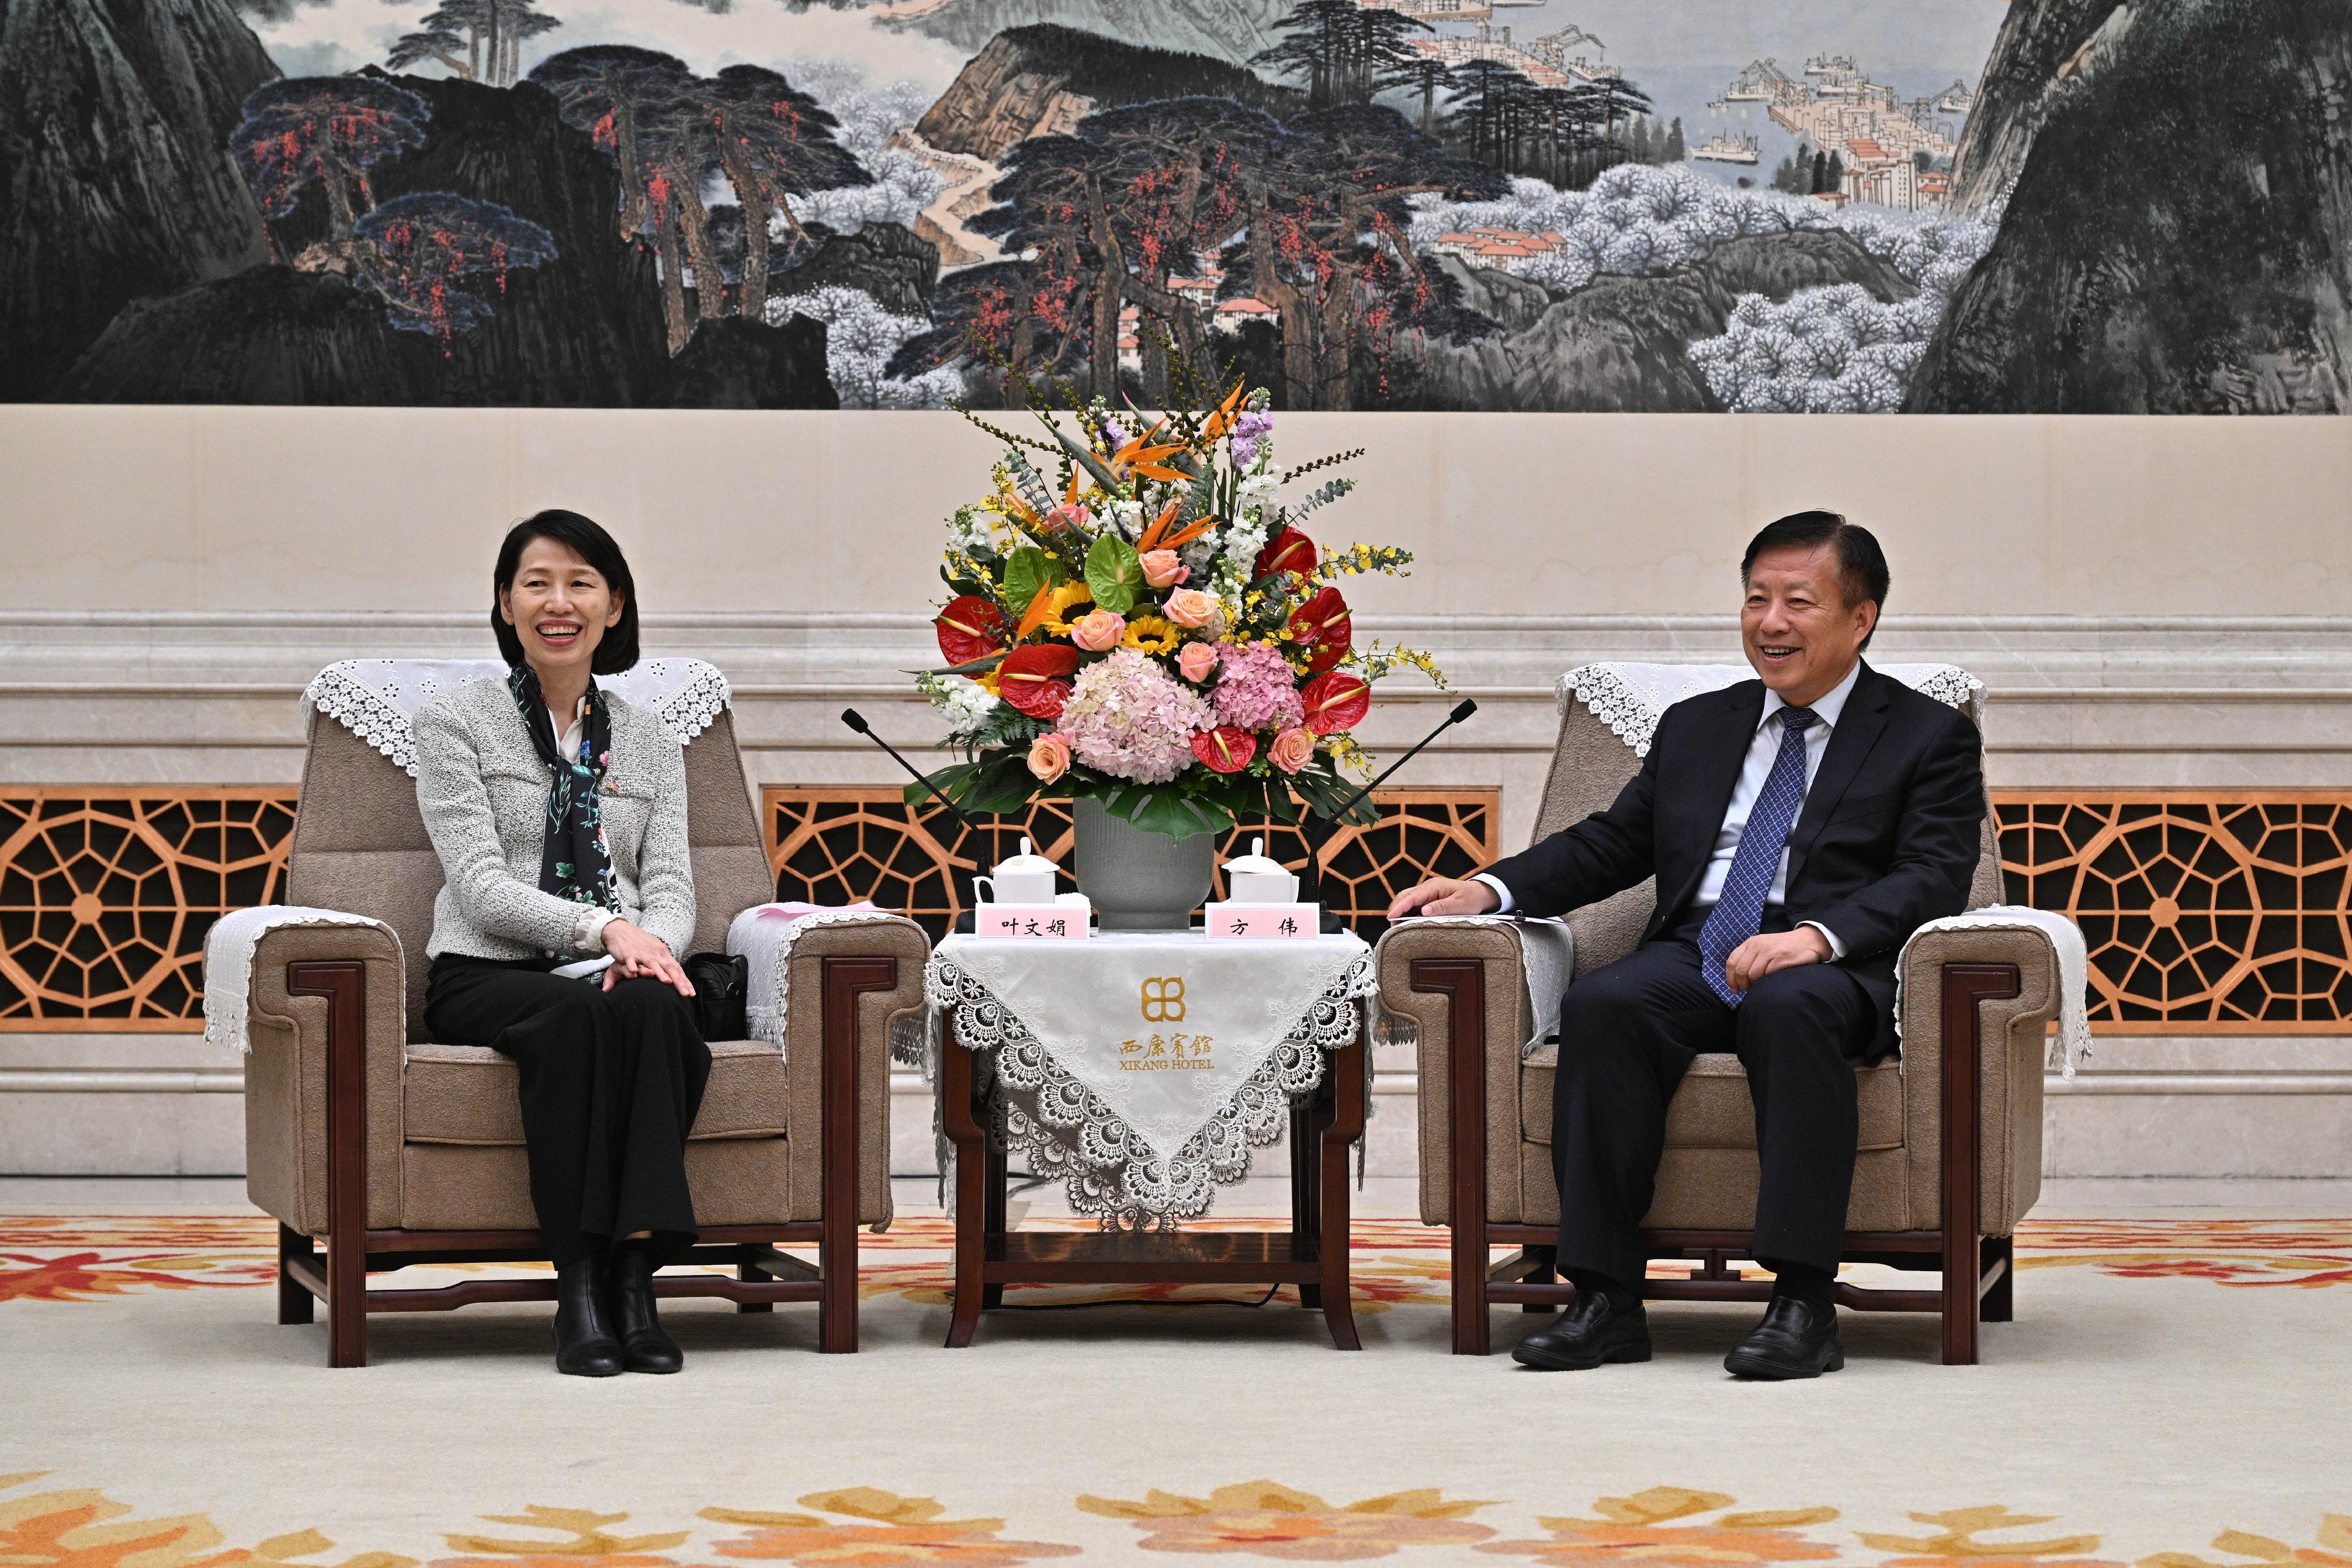 The delegation of politically appointed officials on a national studies programme and duty visit led by the Director of the Chief Executive's Office, Ms Carol Yip (left), yesterday (November 23) called on the Vice Governor of Jiangsu Province, Mr Fang Wei (right).